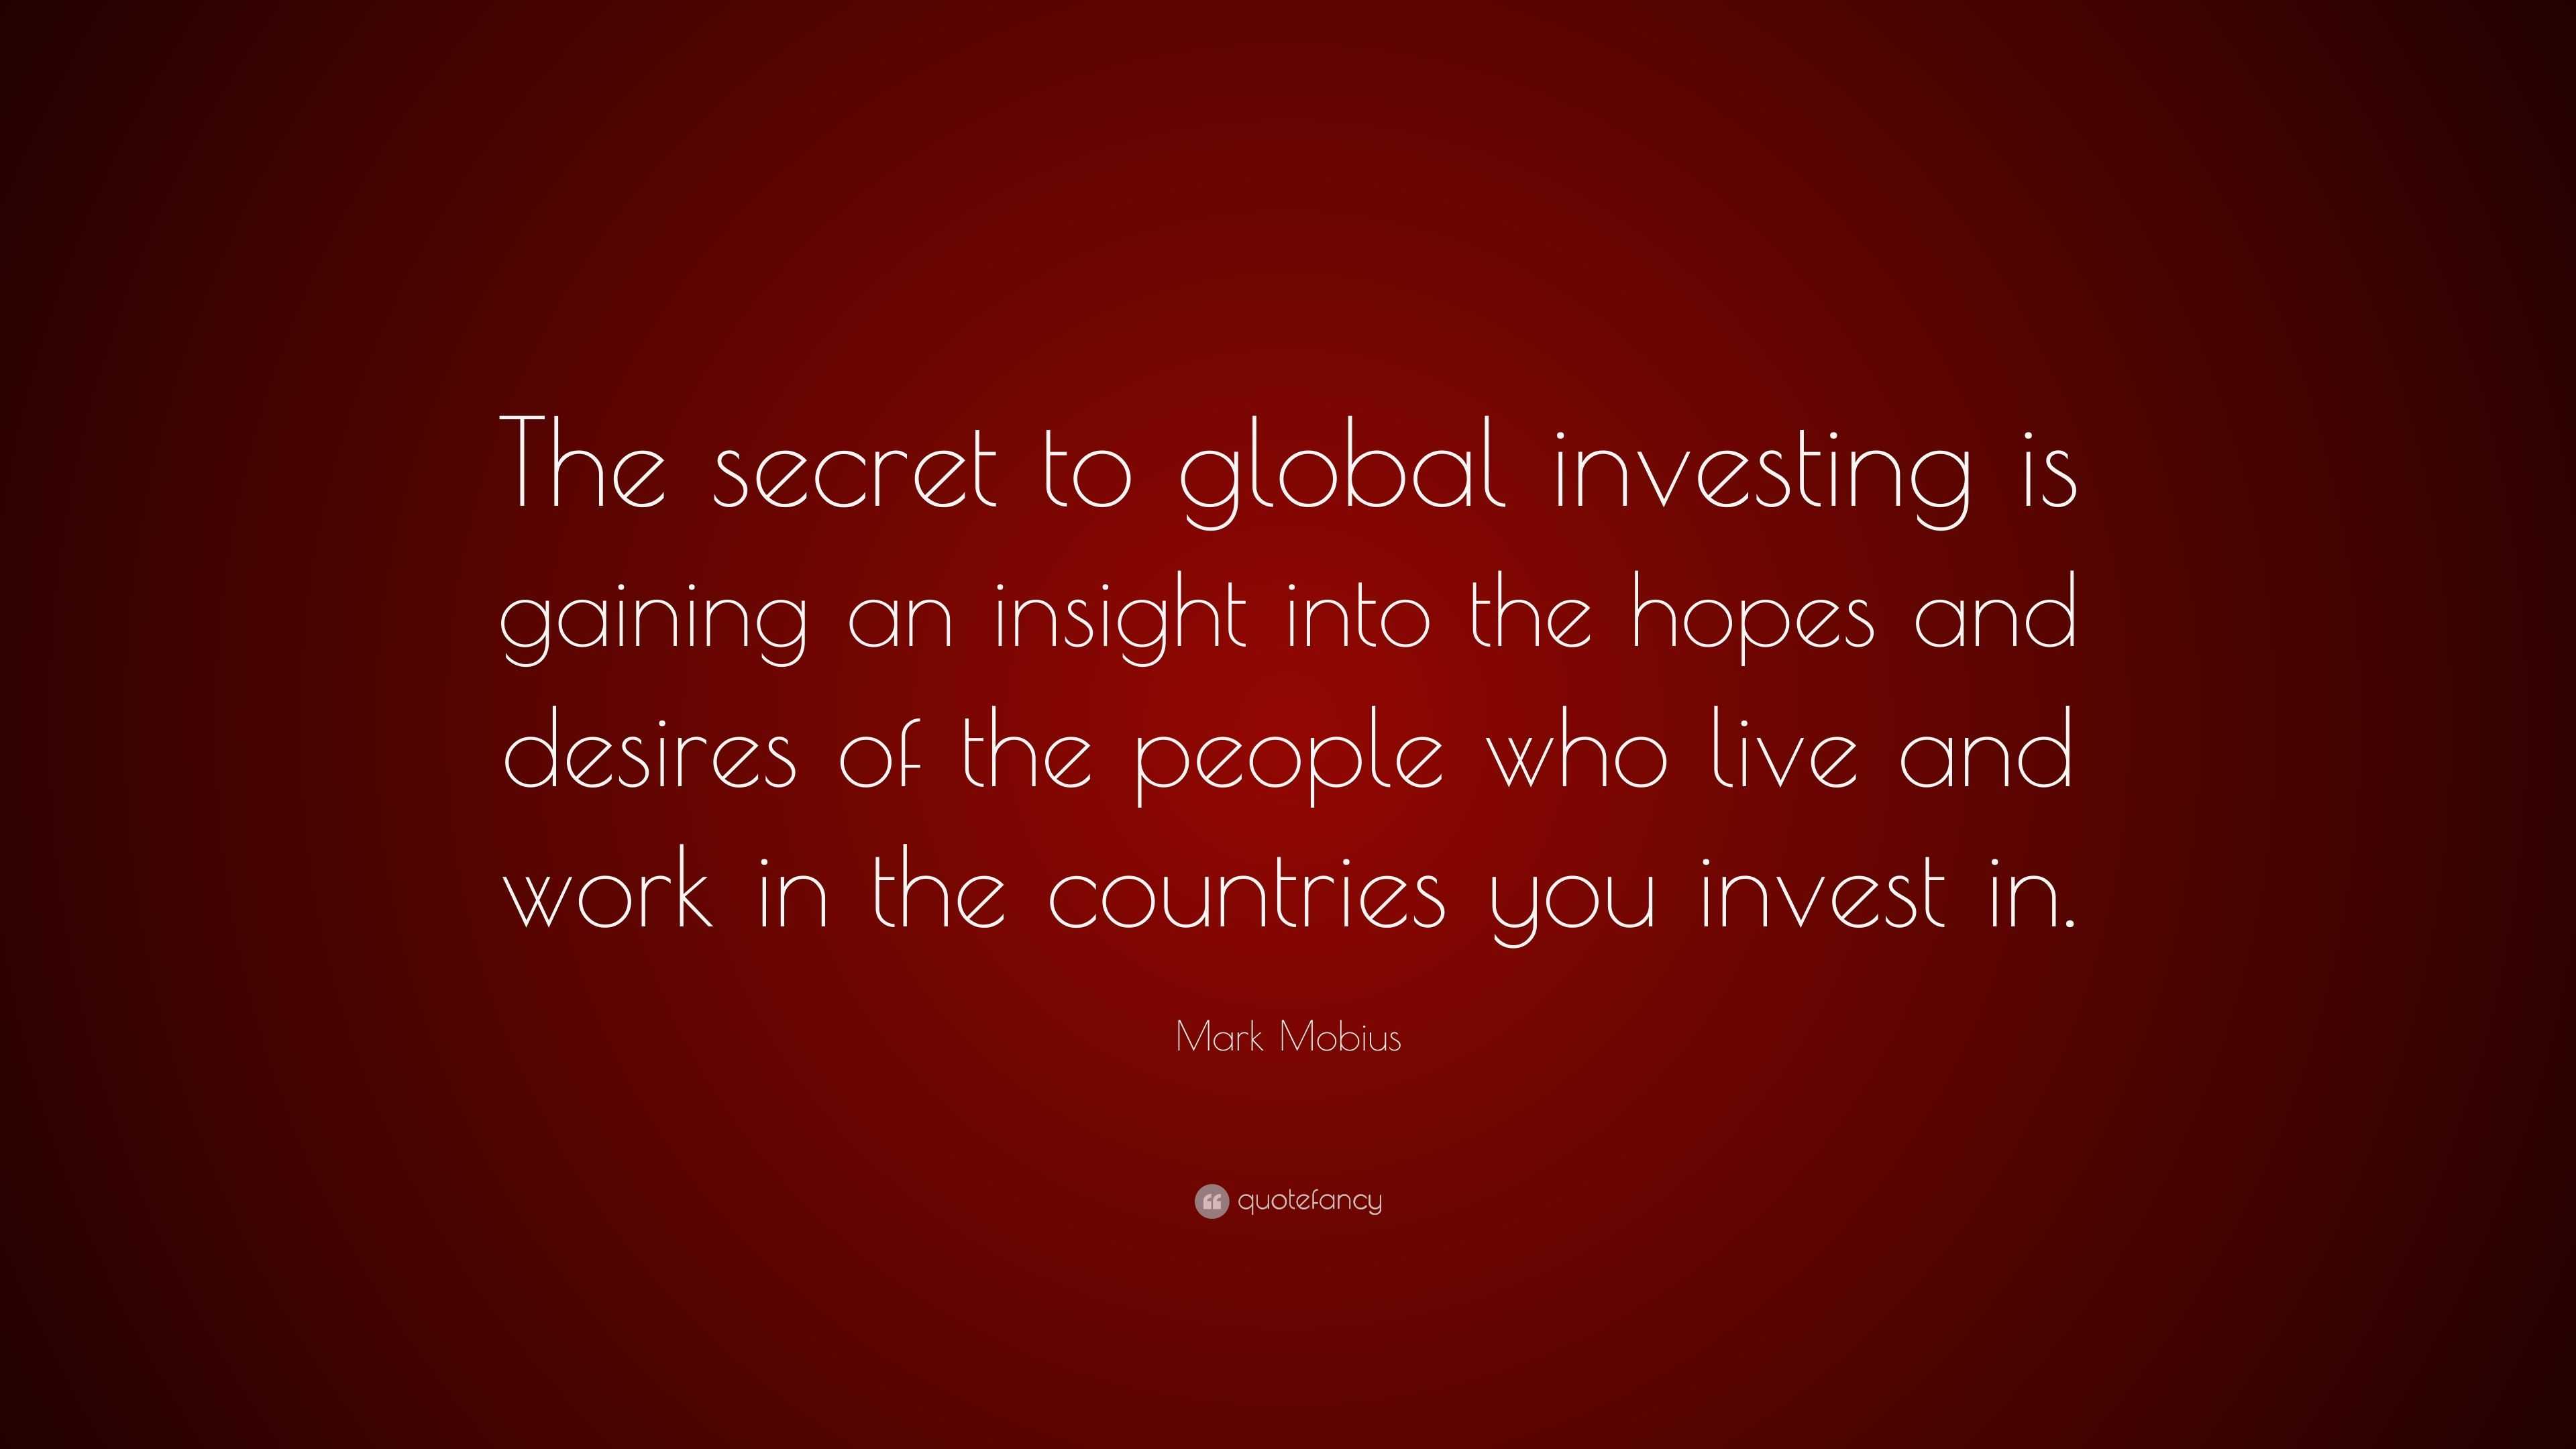 Mark Mobius Quote: “The secret to global investing is gaining an ...